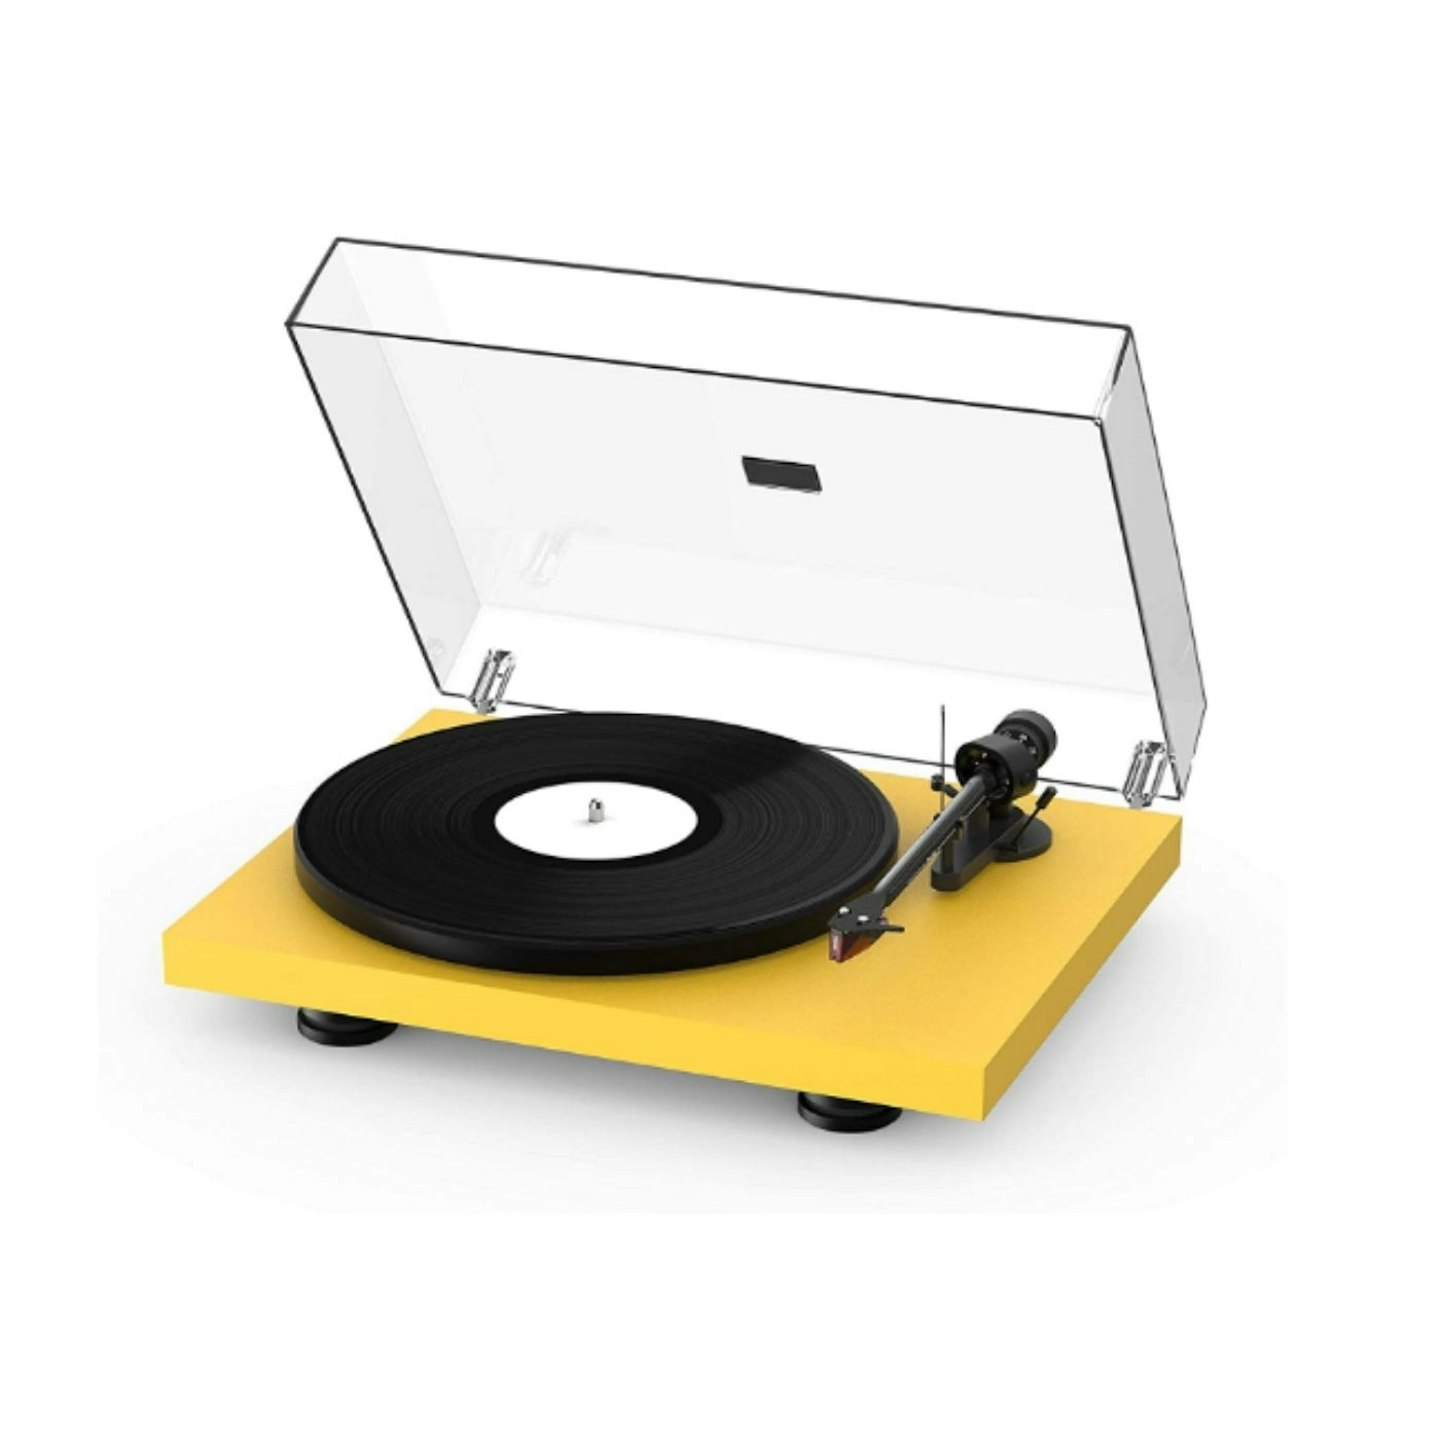 Pro-Ject Debut Carbon EVO, Audiophile turntable in yellow